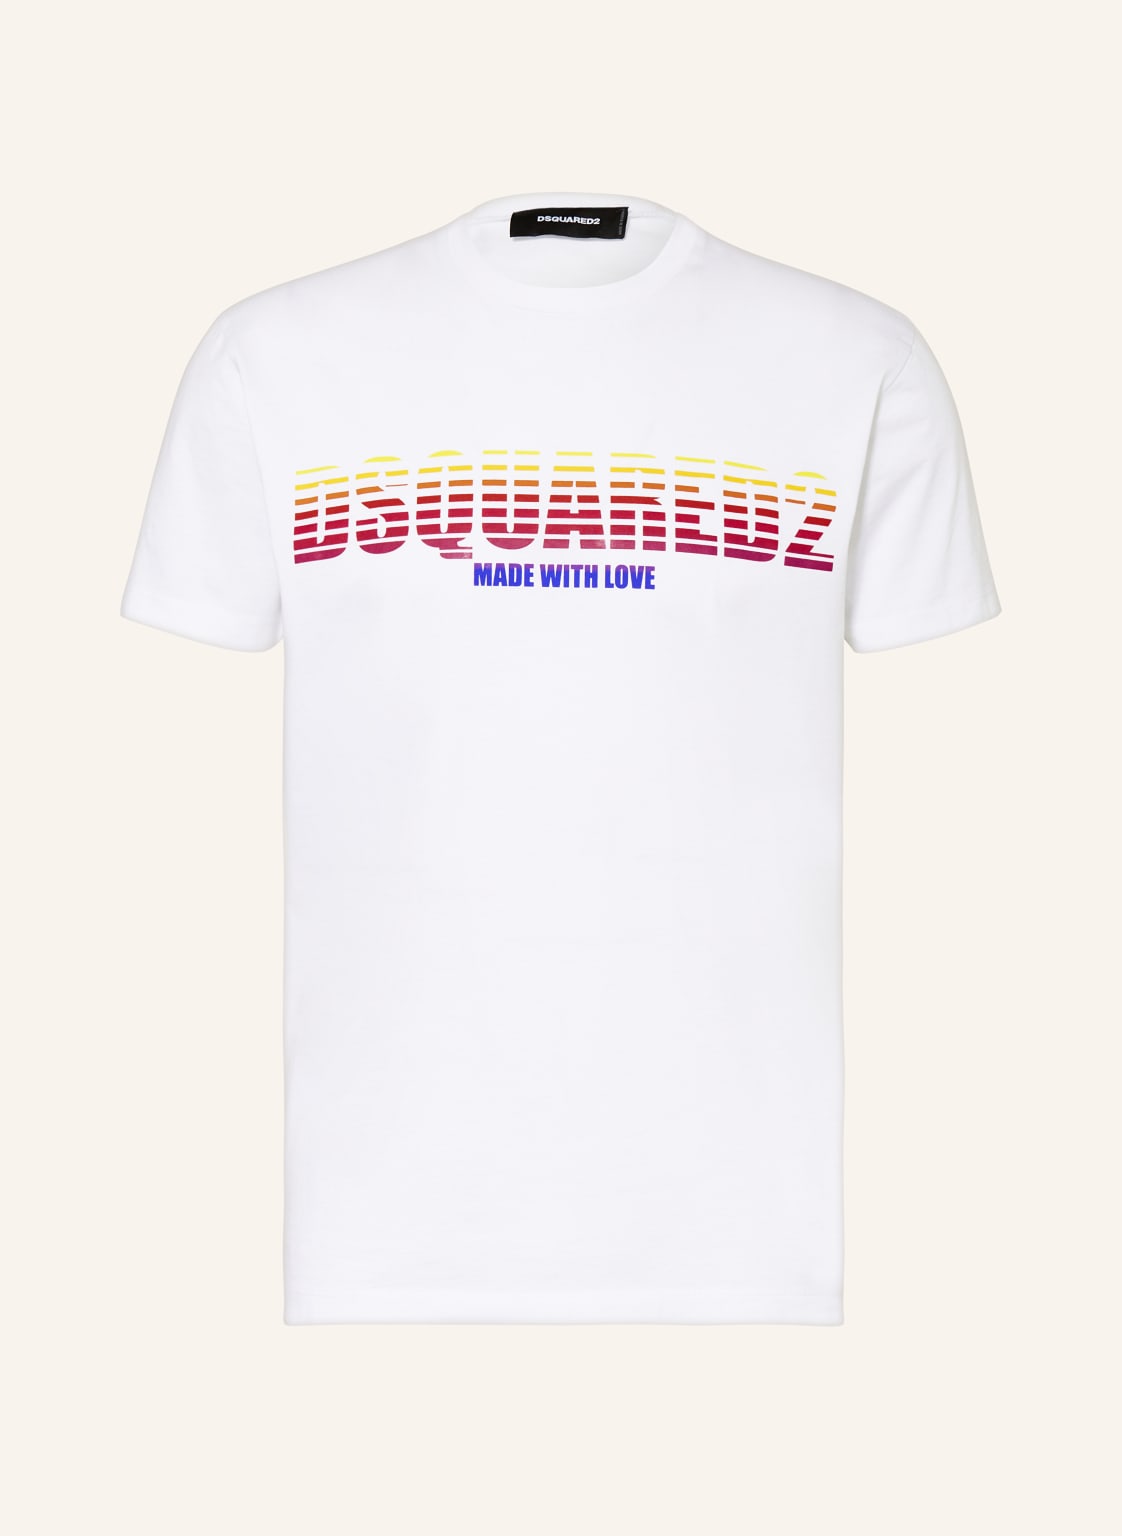 dsquared2 T-Shirt Cool Fit ds2 Made With Love weiss von Dsquared2